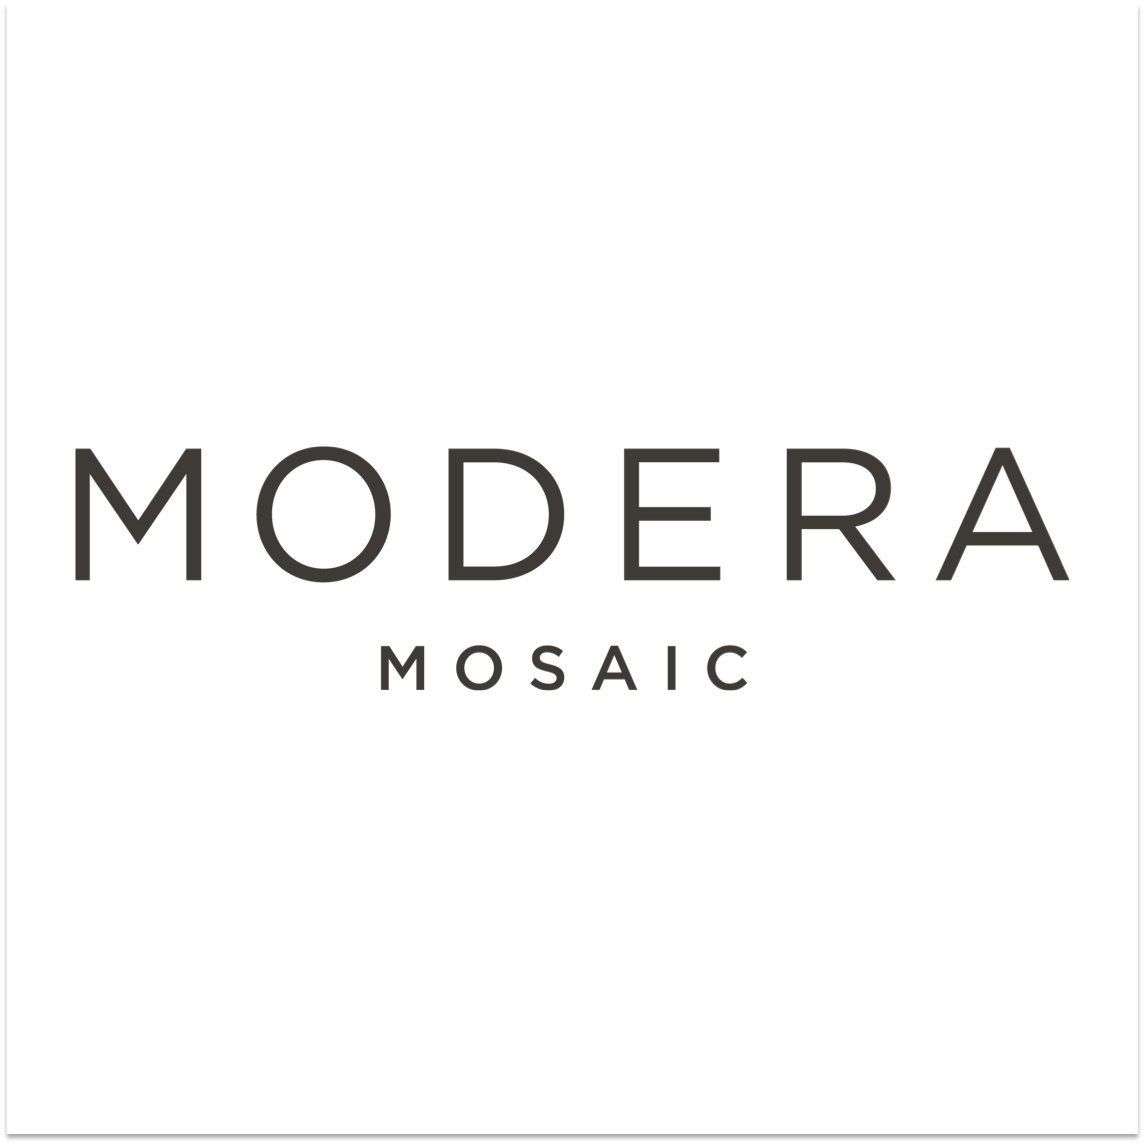 Modera Mosaic is an urban example of contemporary architecture that complements the eclectic design of the Mosaic District and its retail tenants.